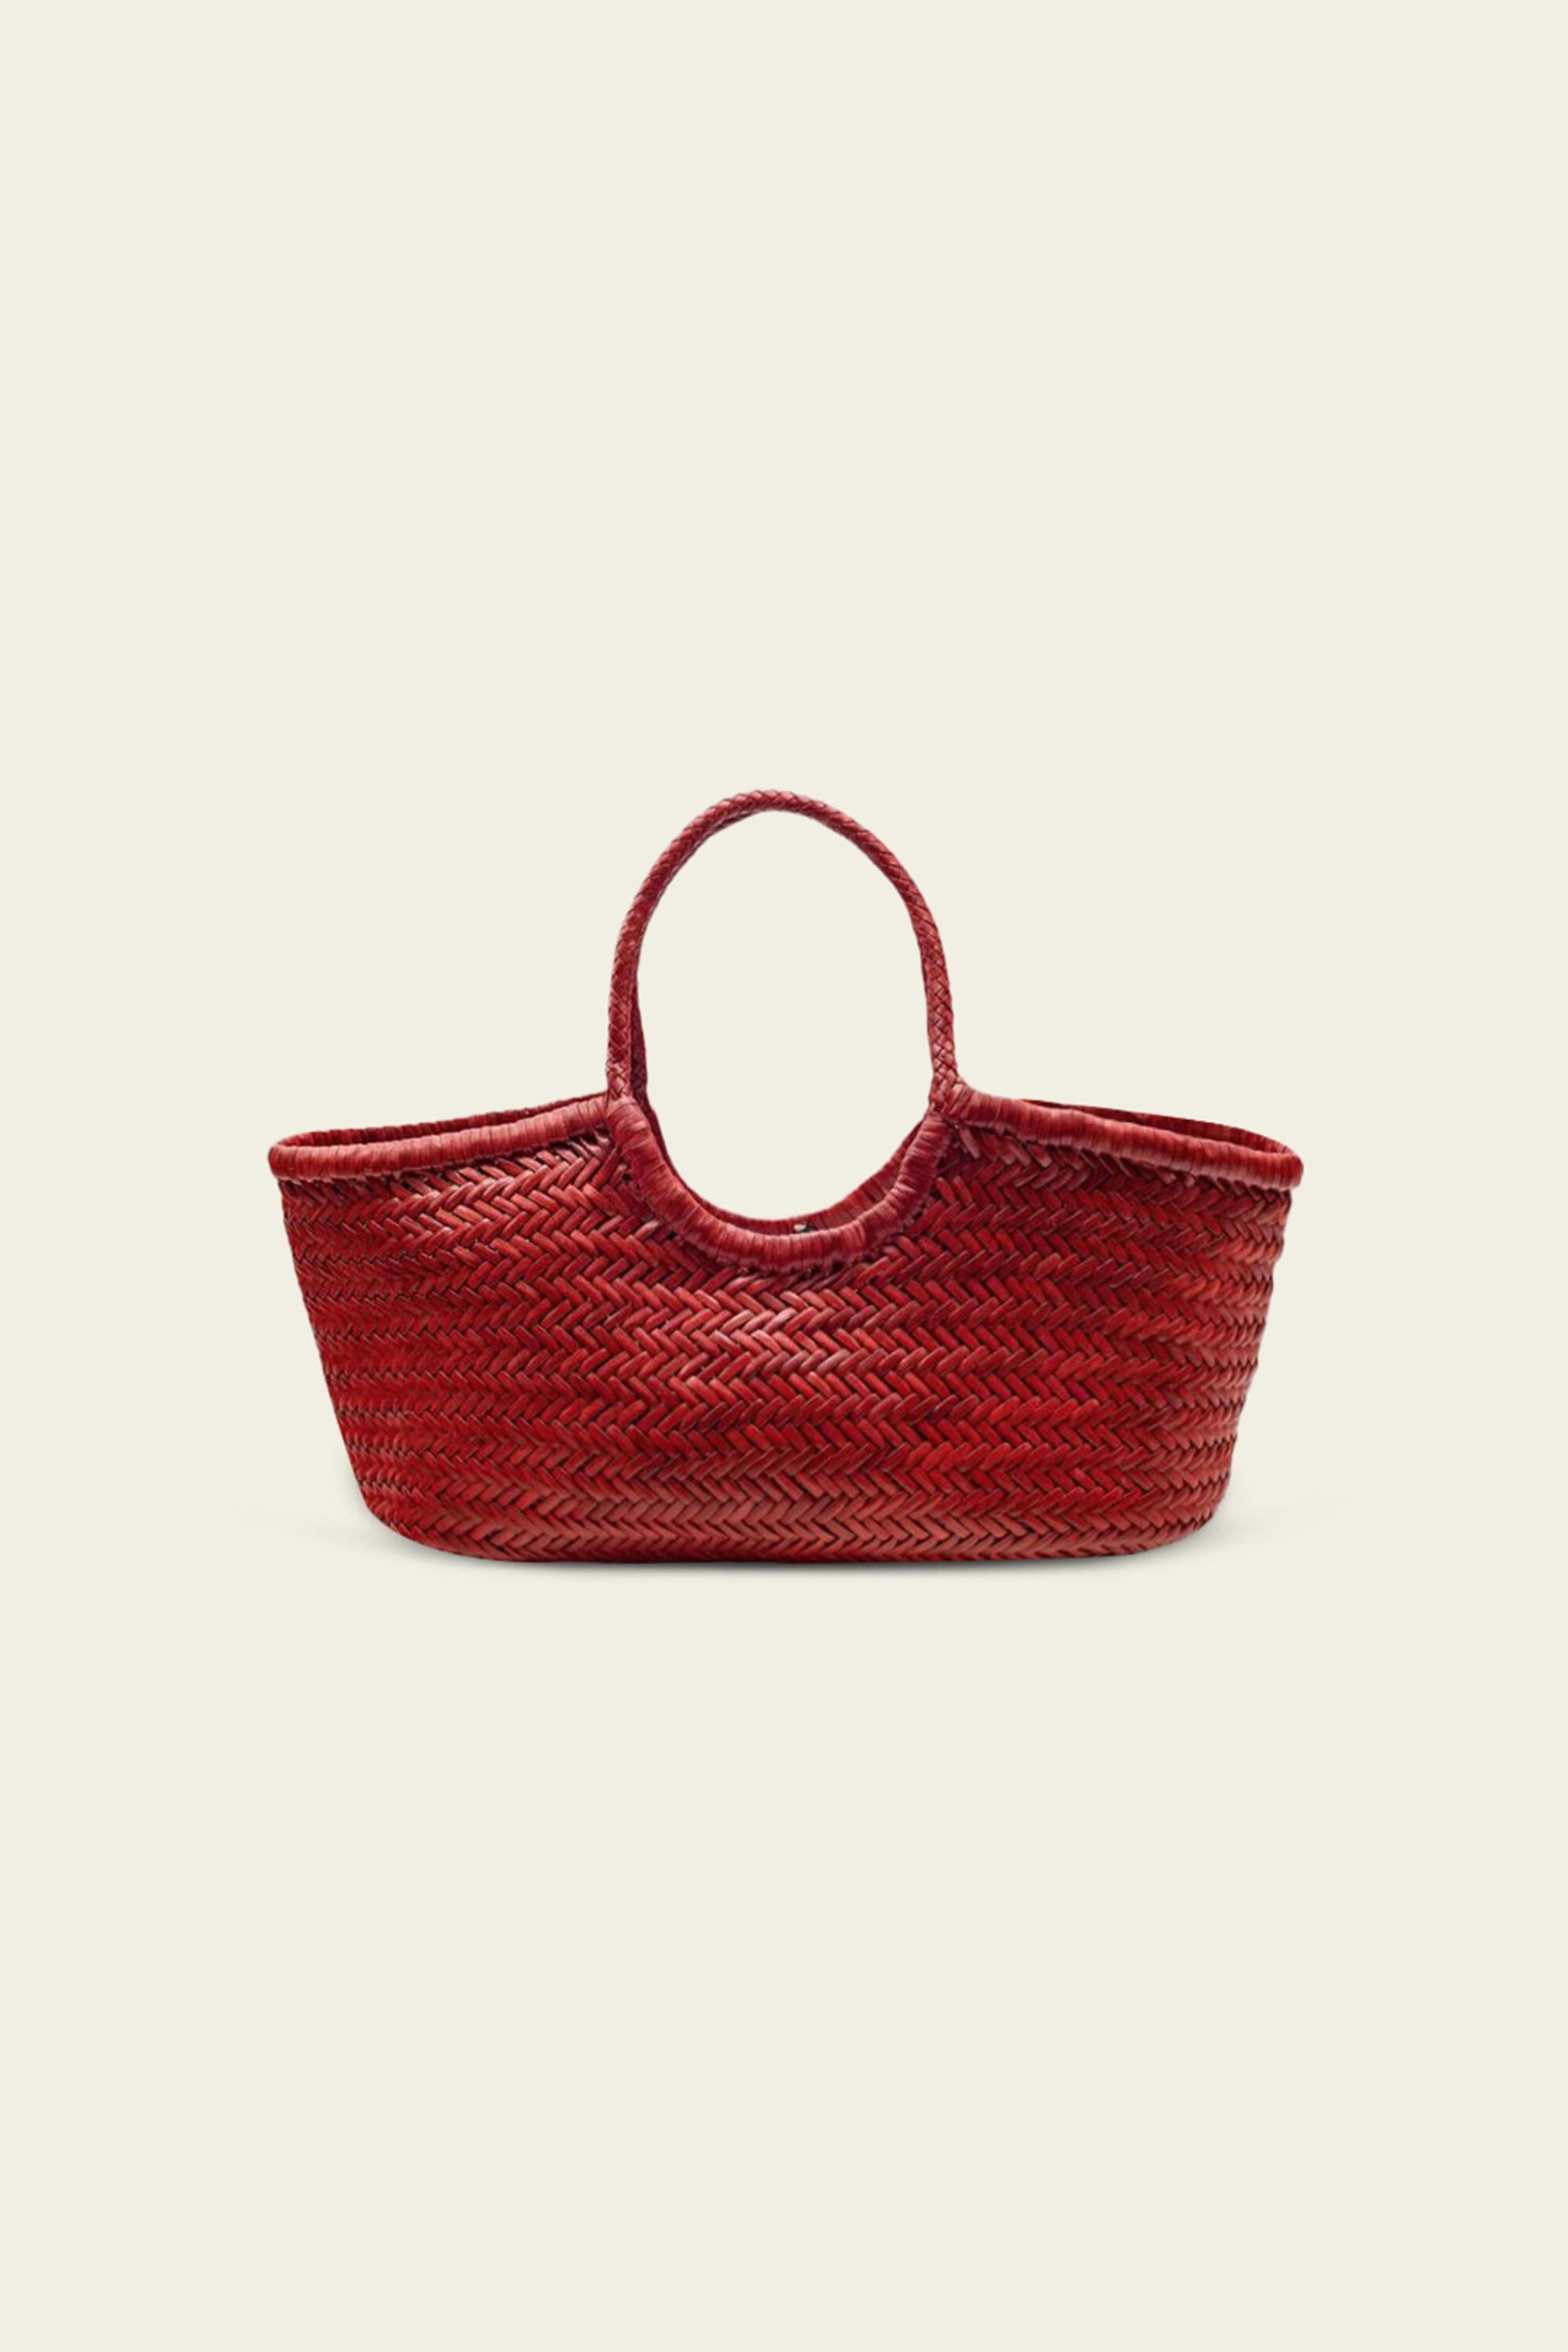 Foyer Tote in Deep Red Size-16